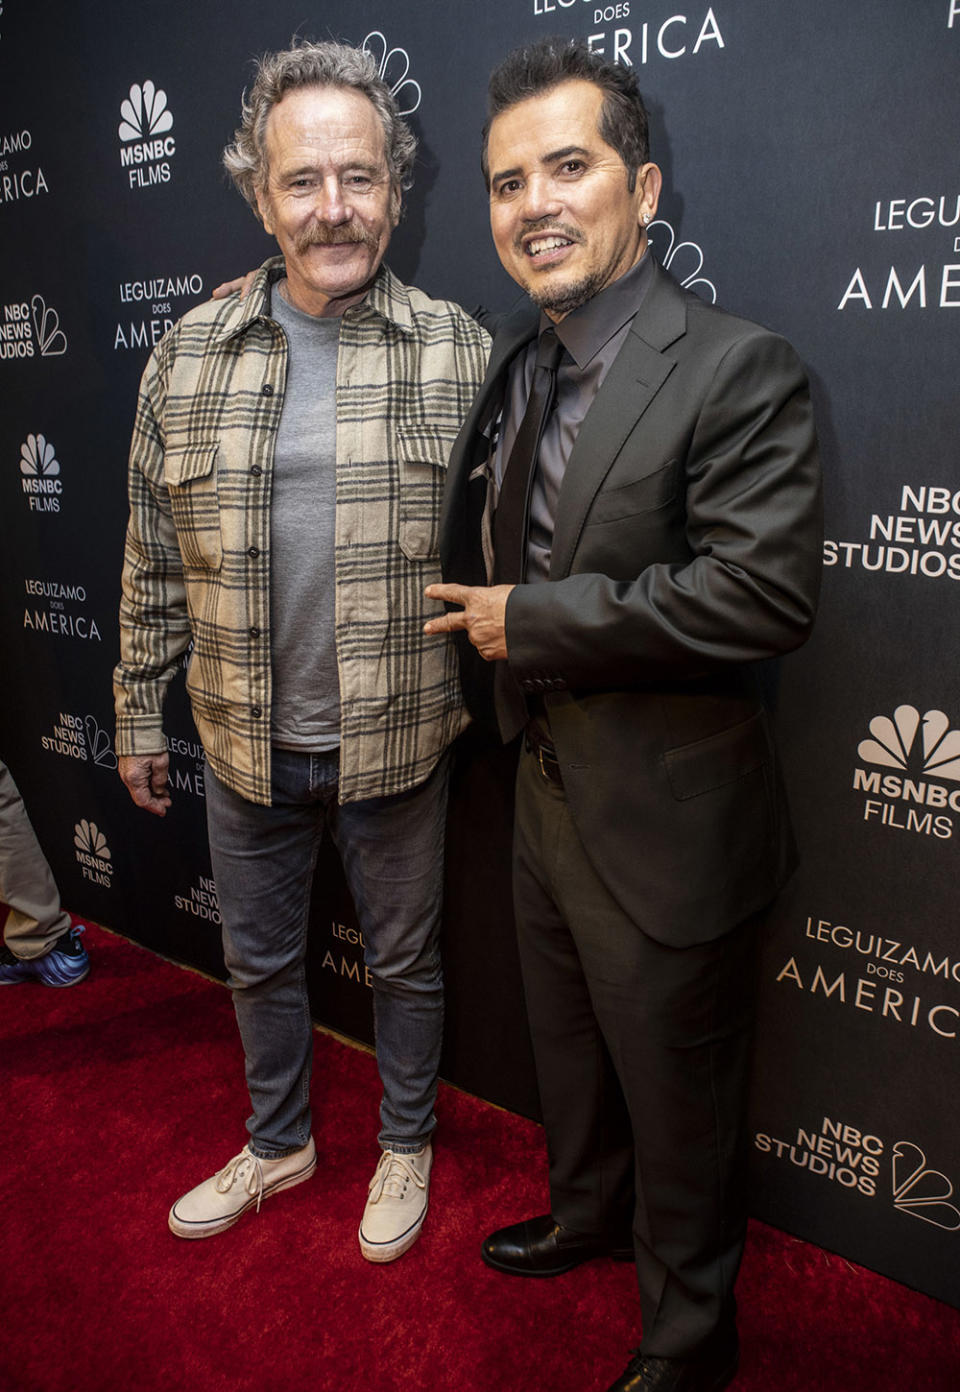 (L-R) Bryan Cranston and John Leguizamo attend the Los Angeles Special Screening Of "Leguizamo Does America" at Universal Studios AMC at CityWalk Hollywood on April 11, 2023 in Universal City, California.